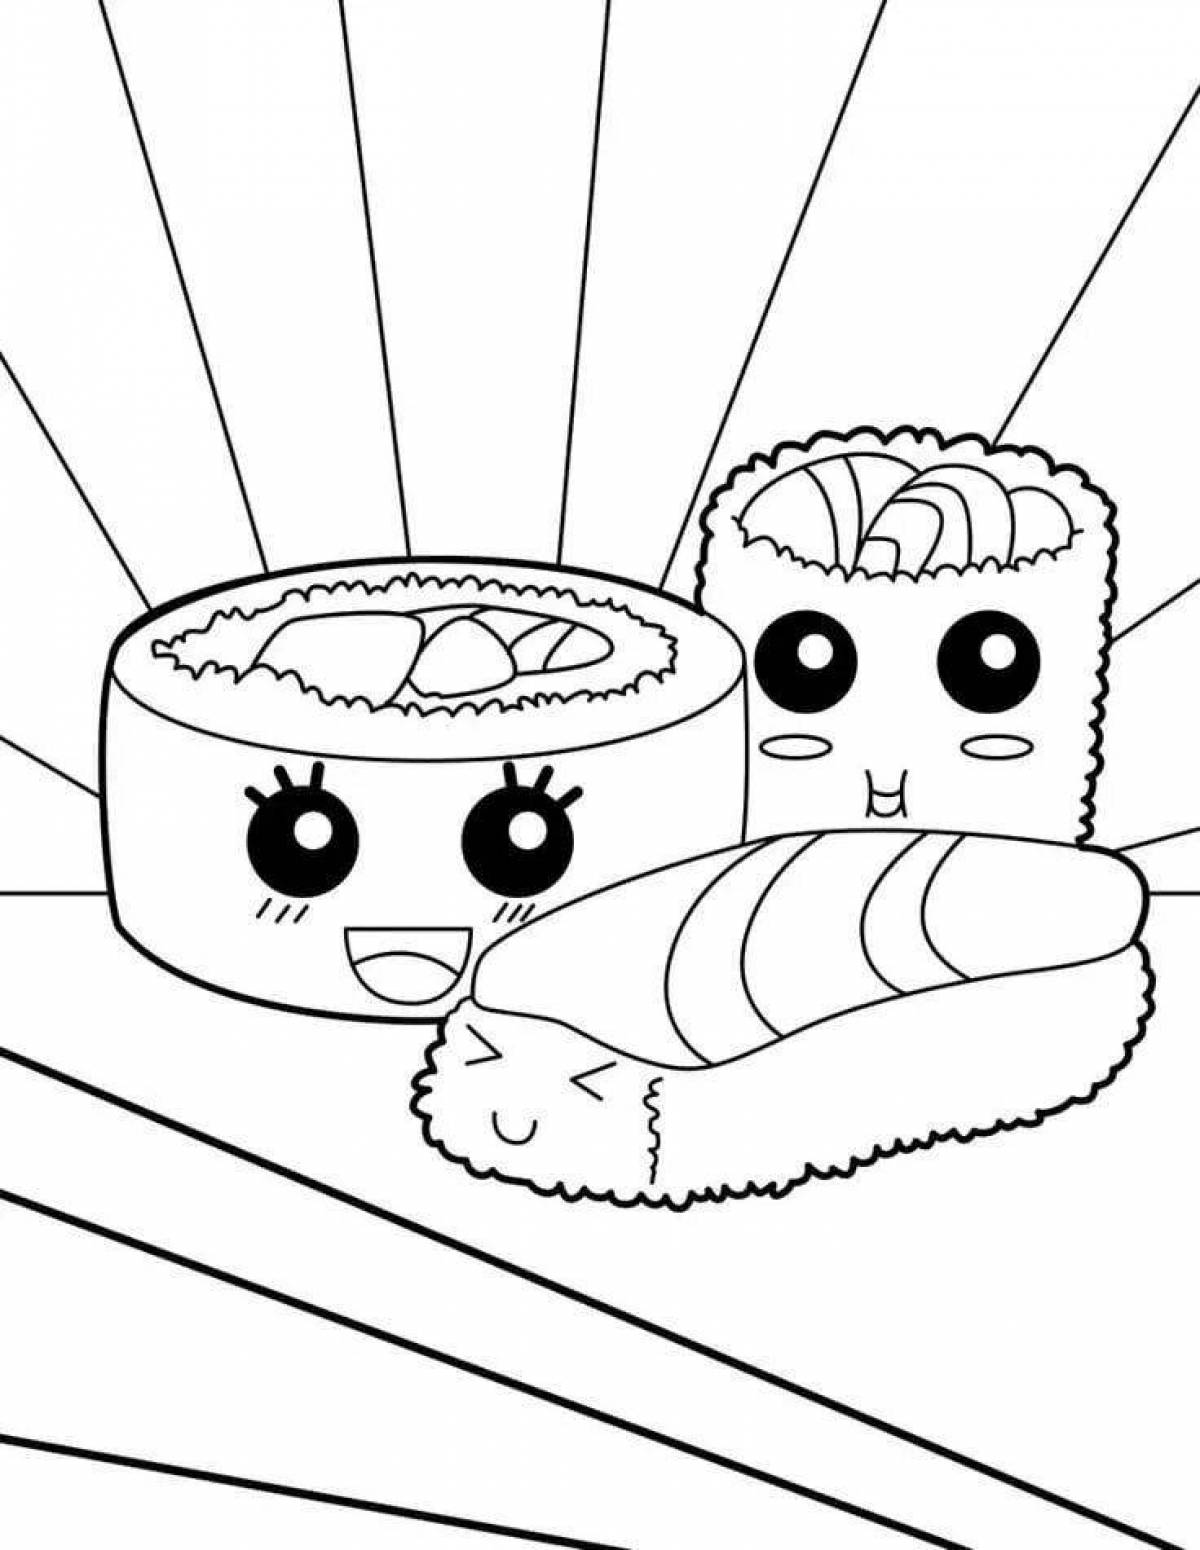 Teasing food and drink coloring book with mini eyes